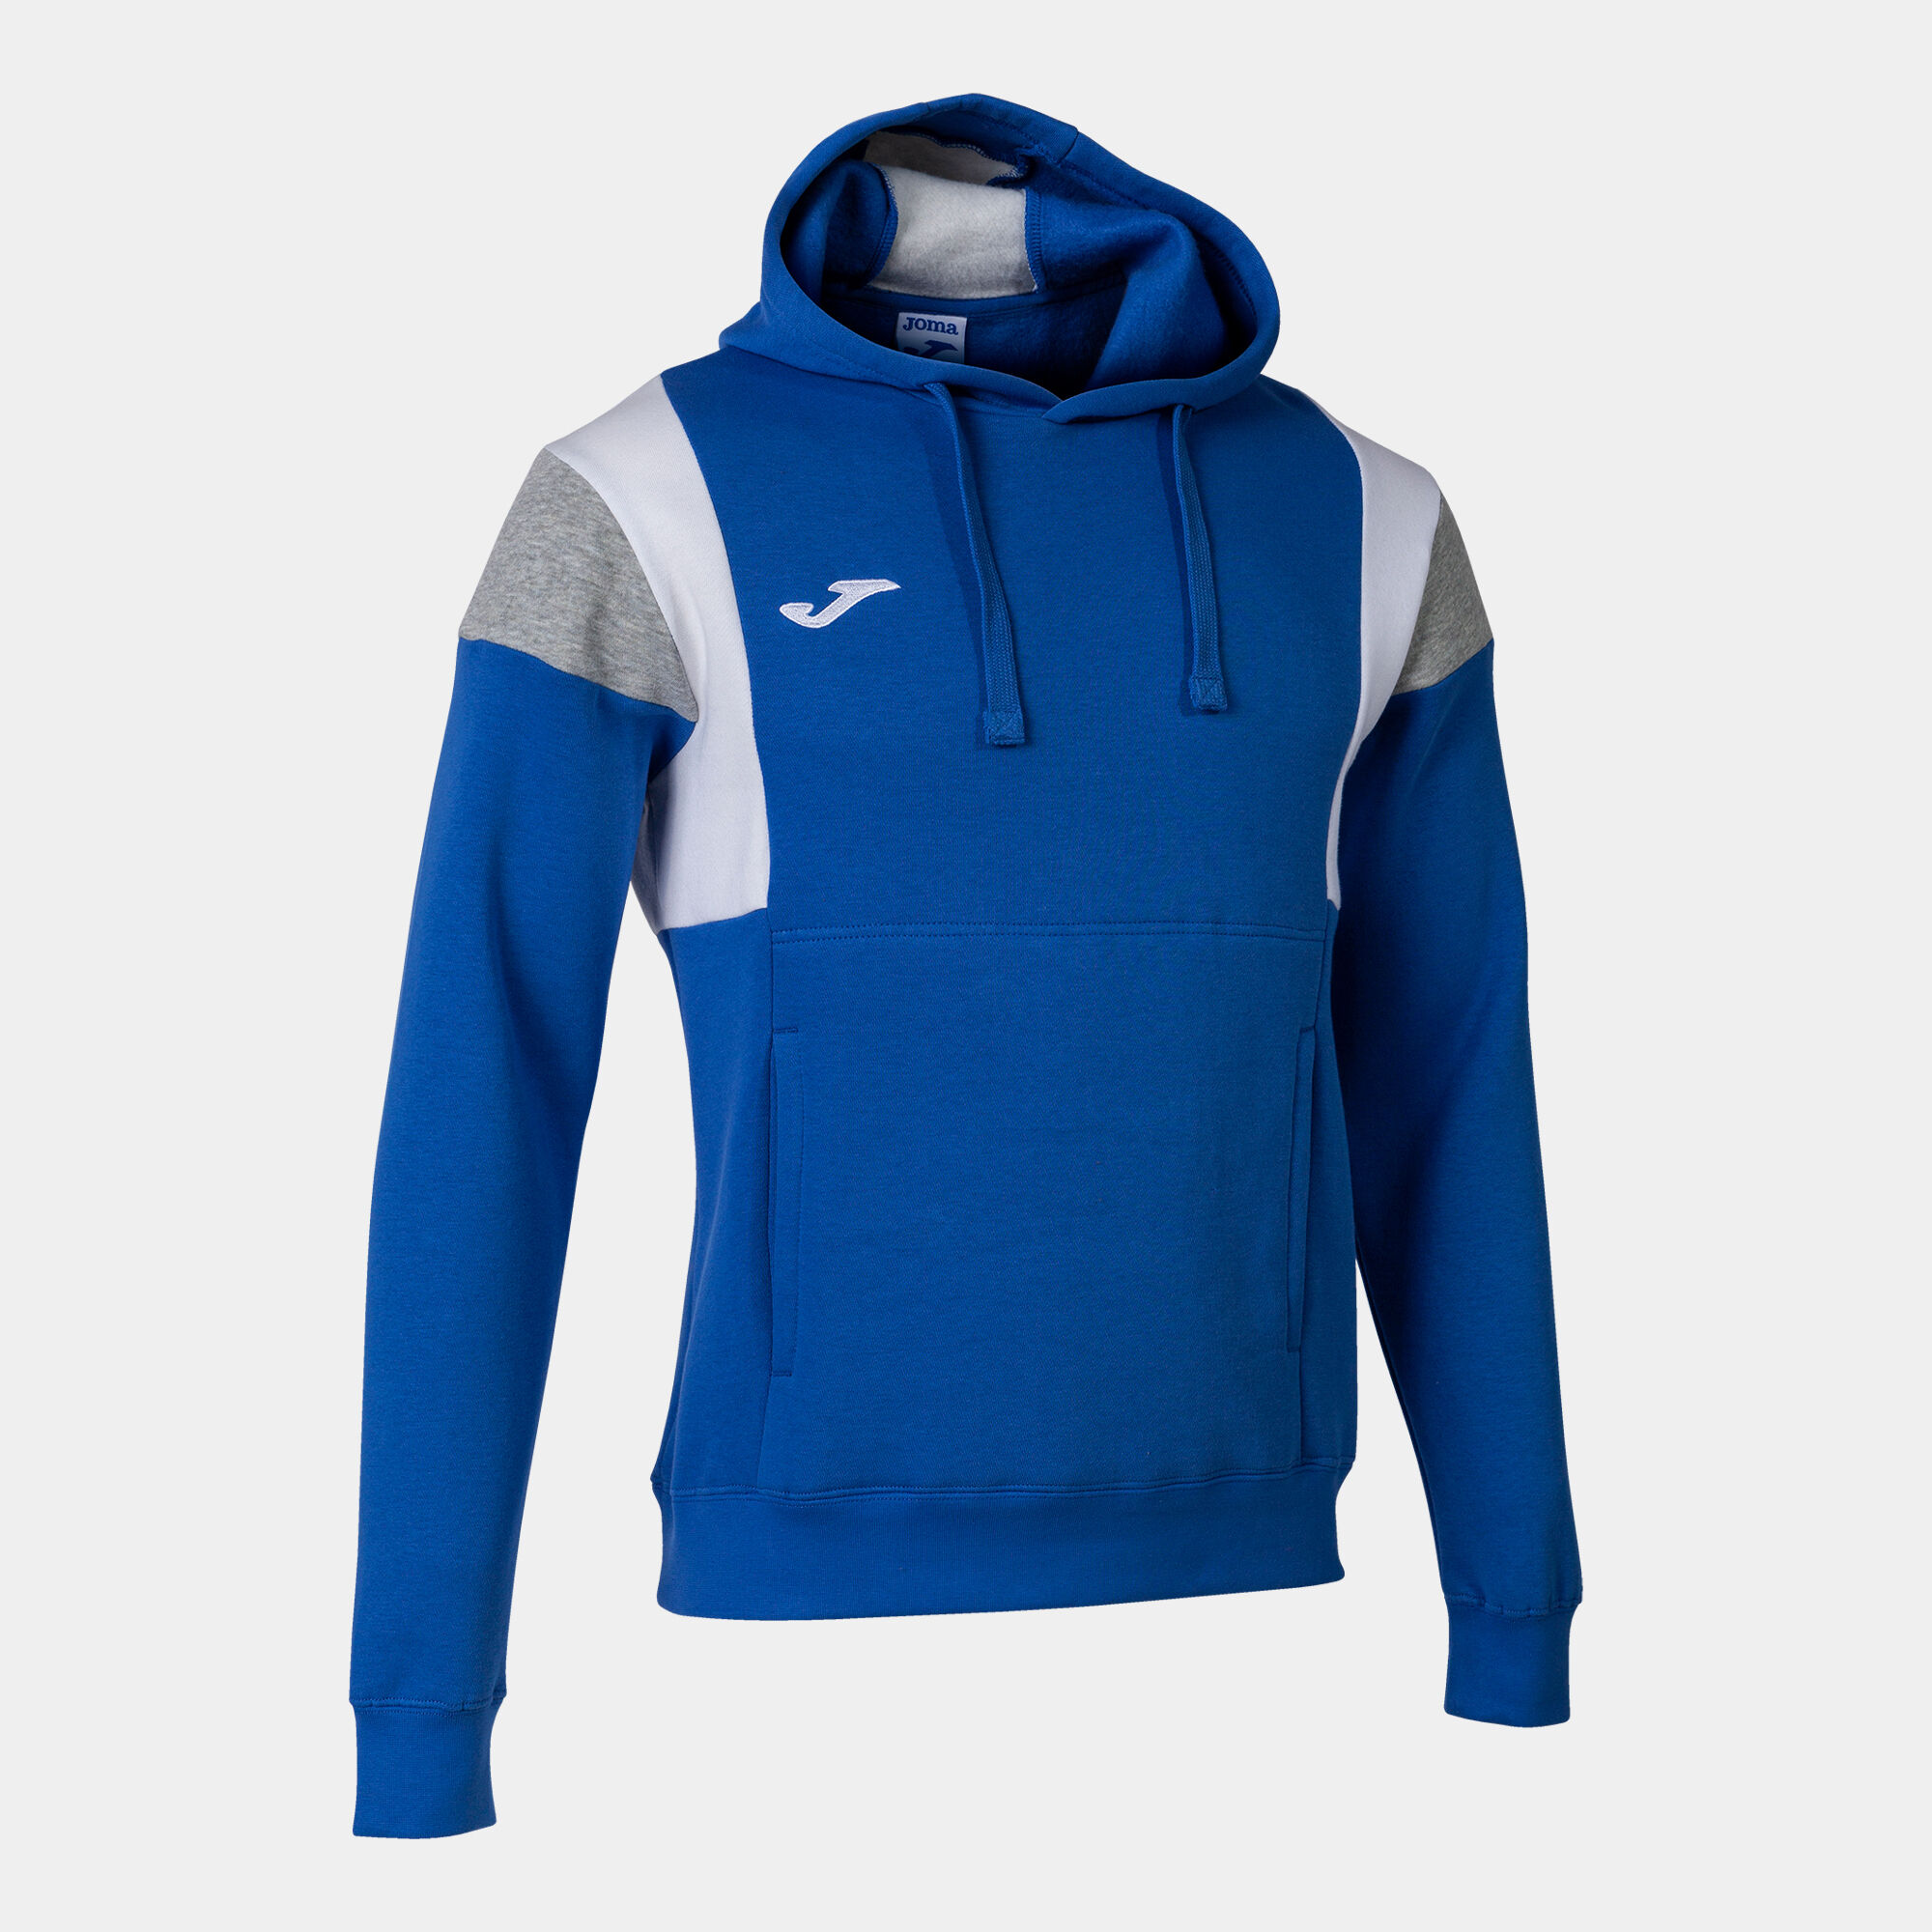 Hooded sweater man Confort III royal blue